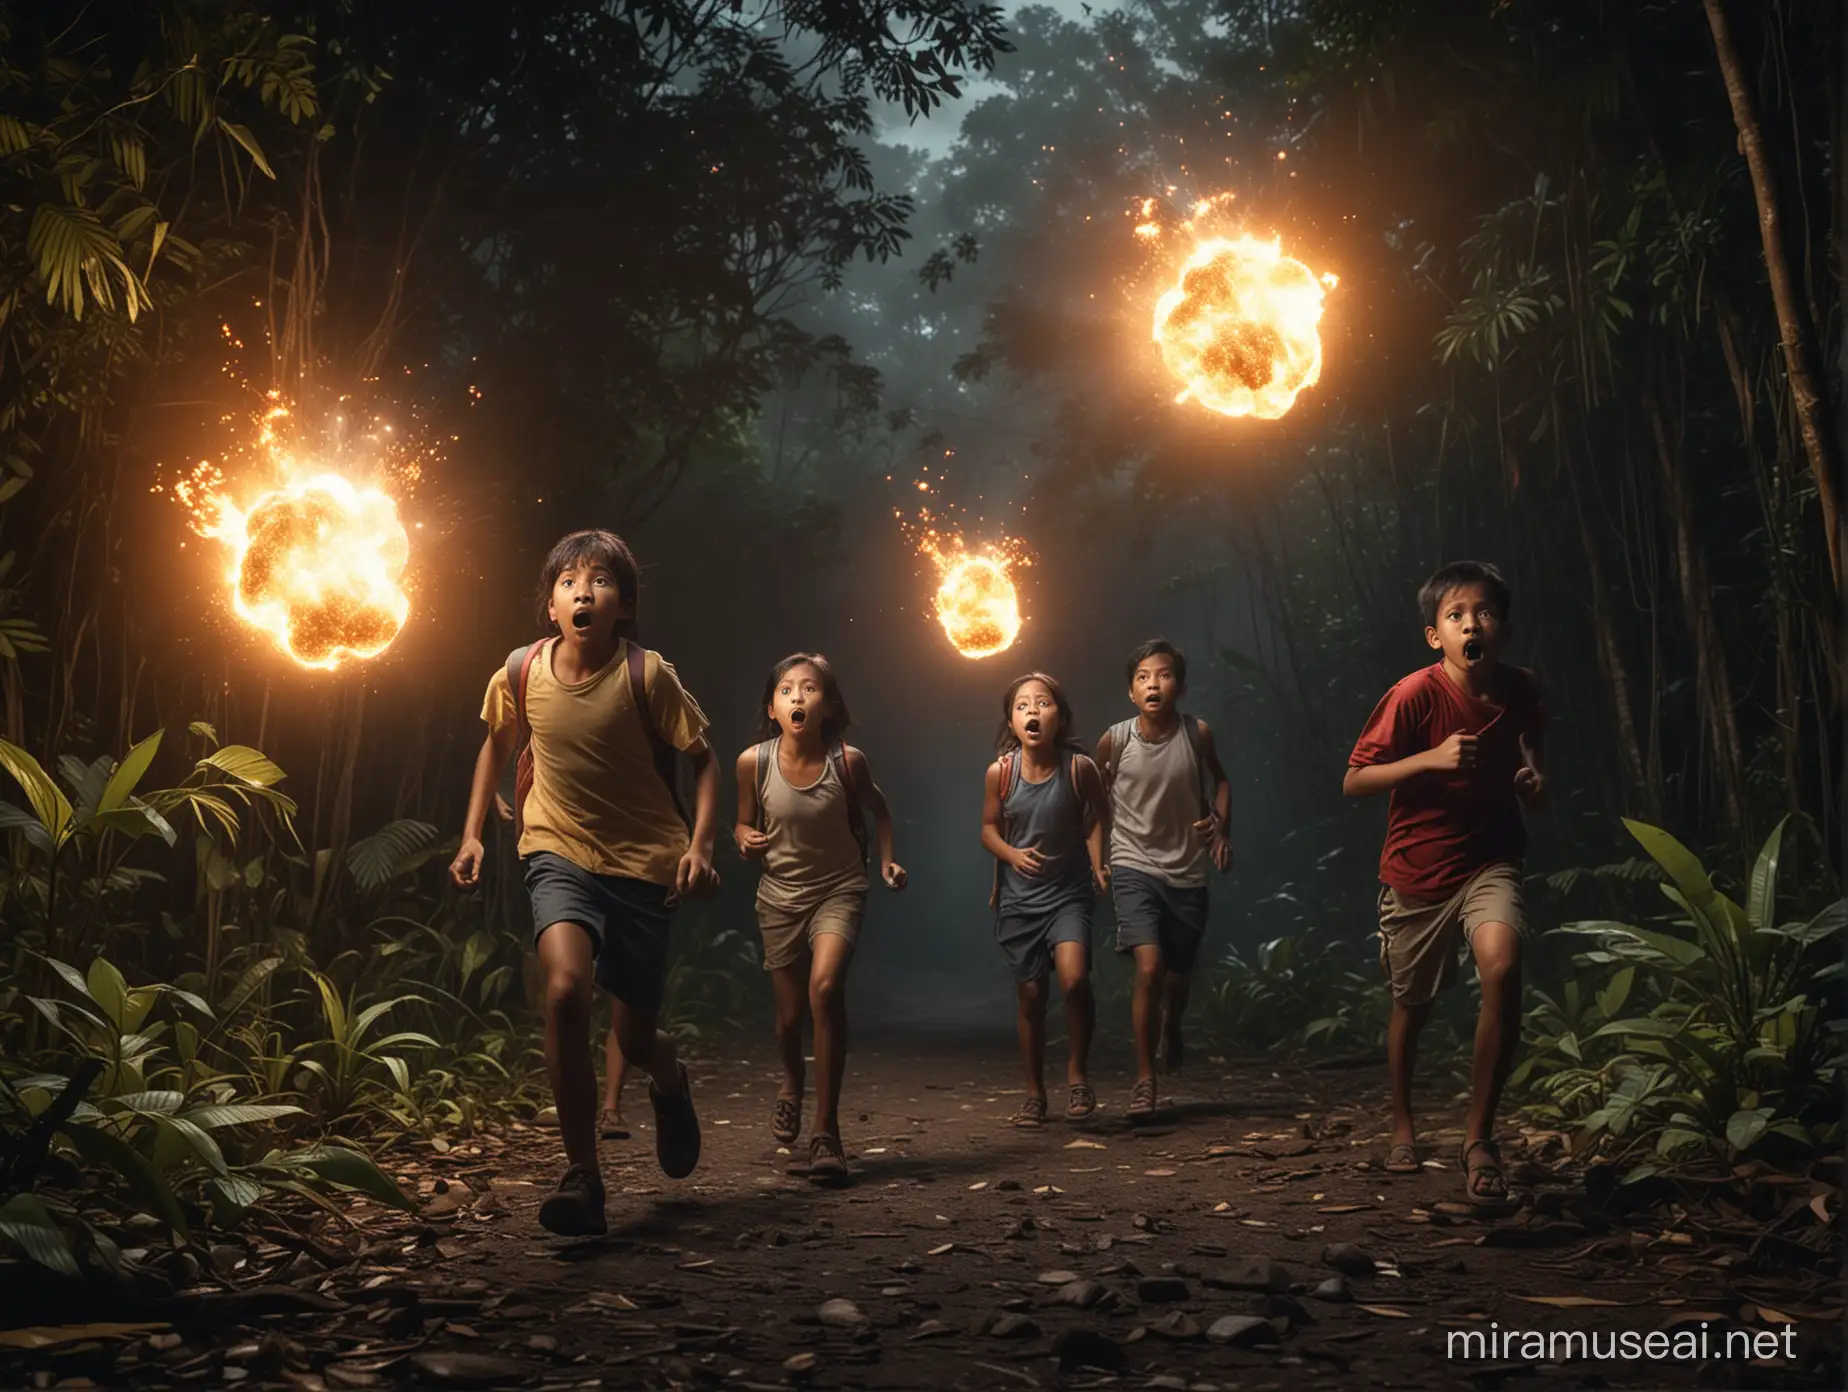 Children Hiking at Night in Jungle with Floating Fireball